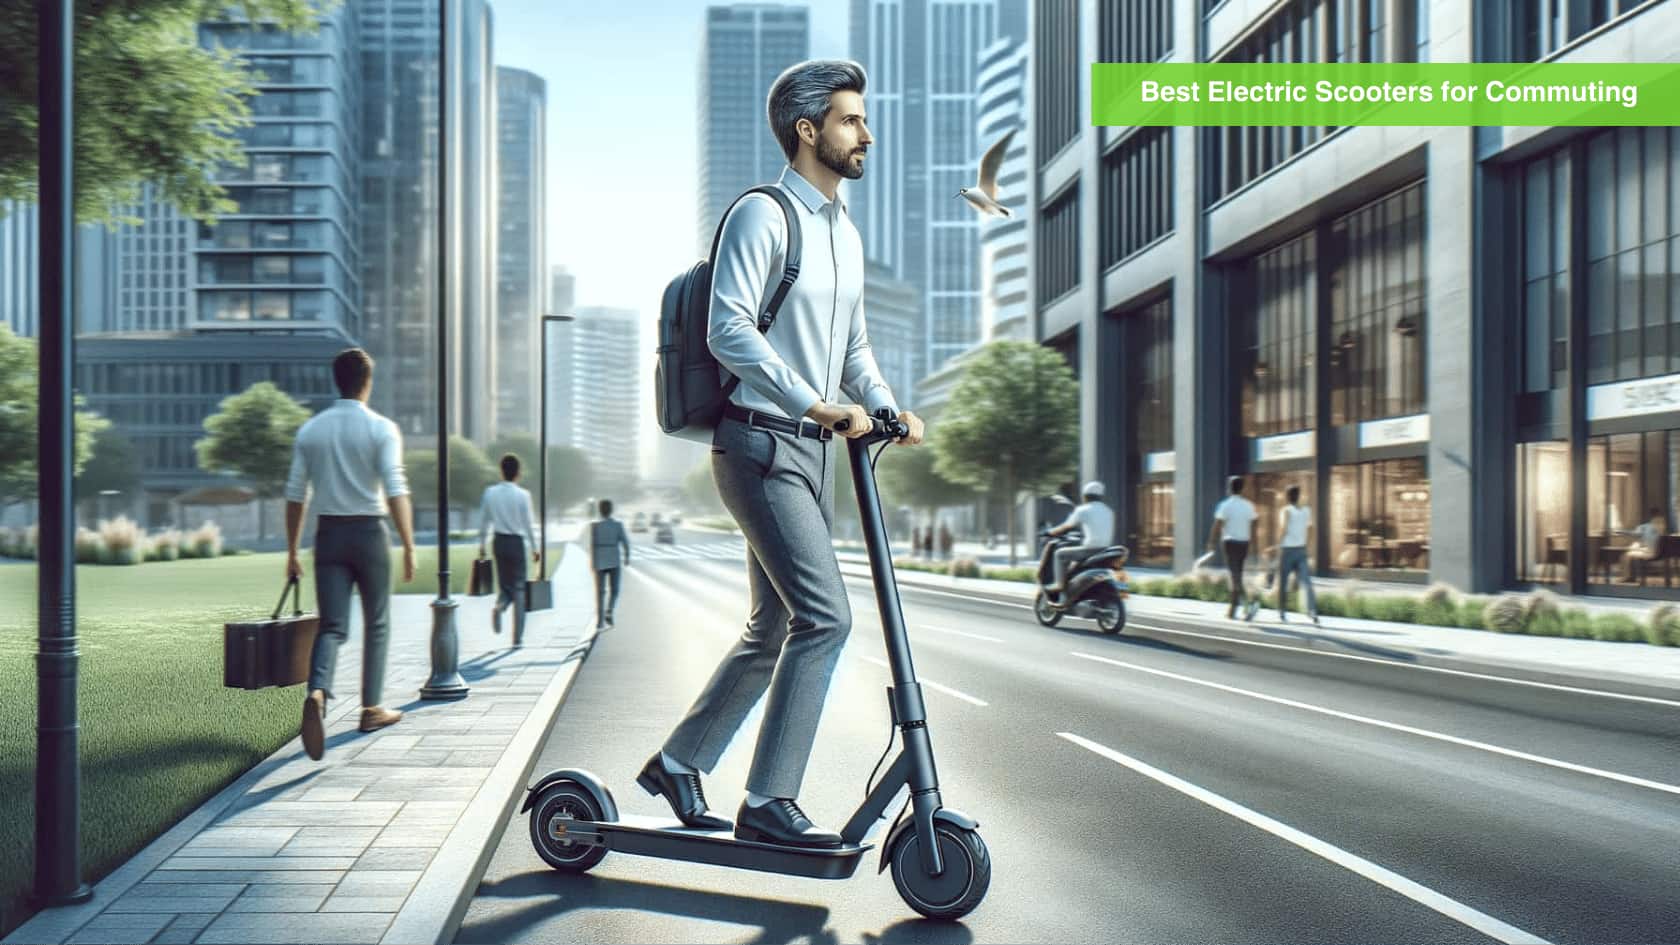  Best Electric Scooters for Commuting